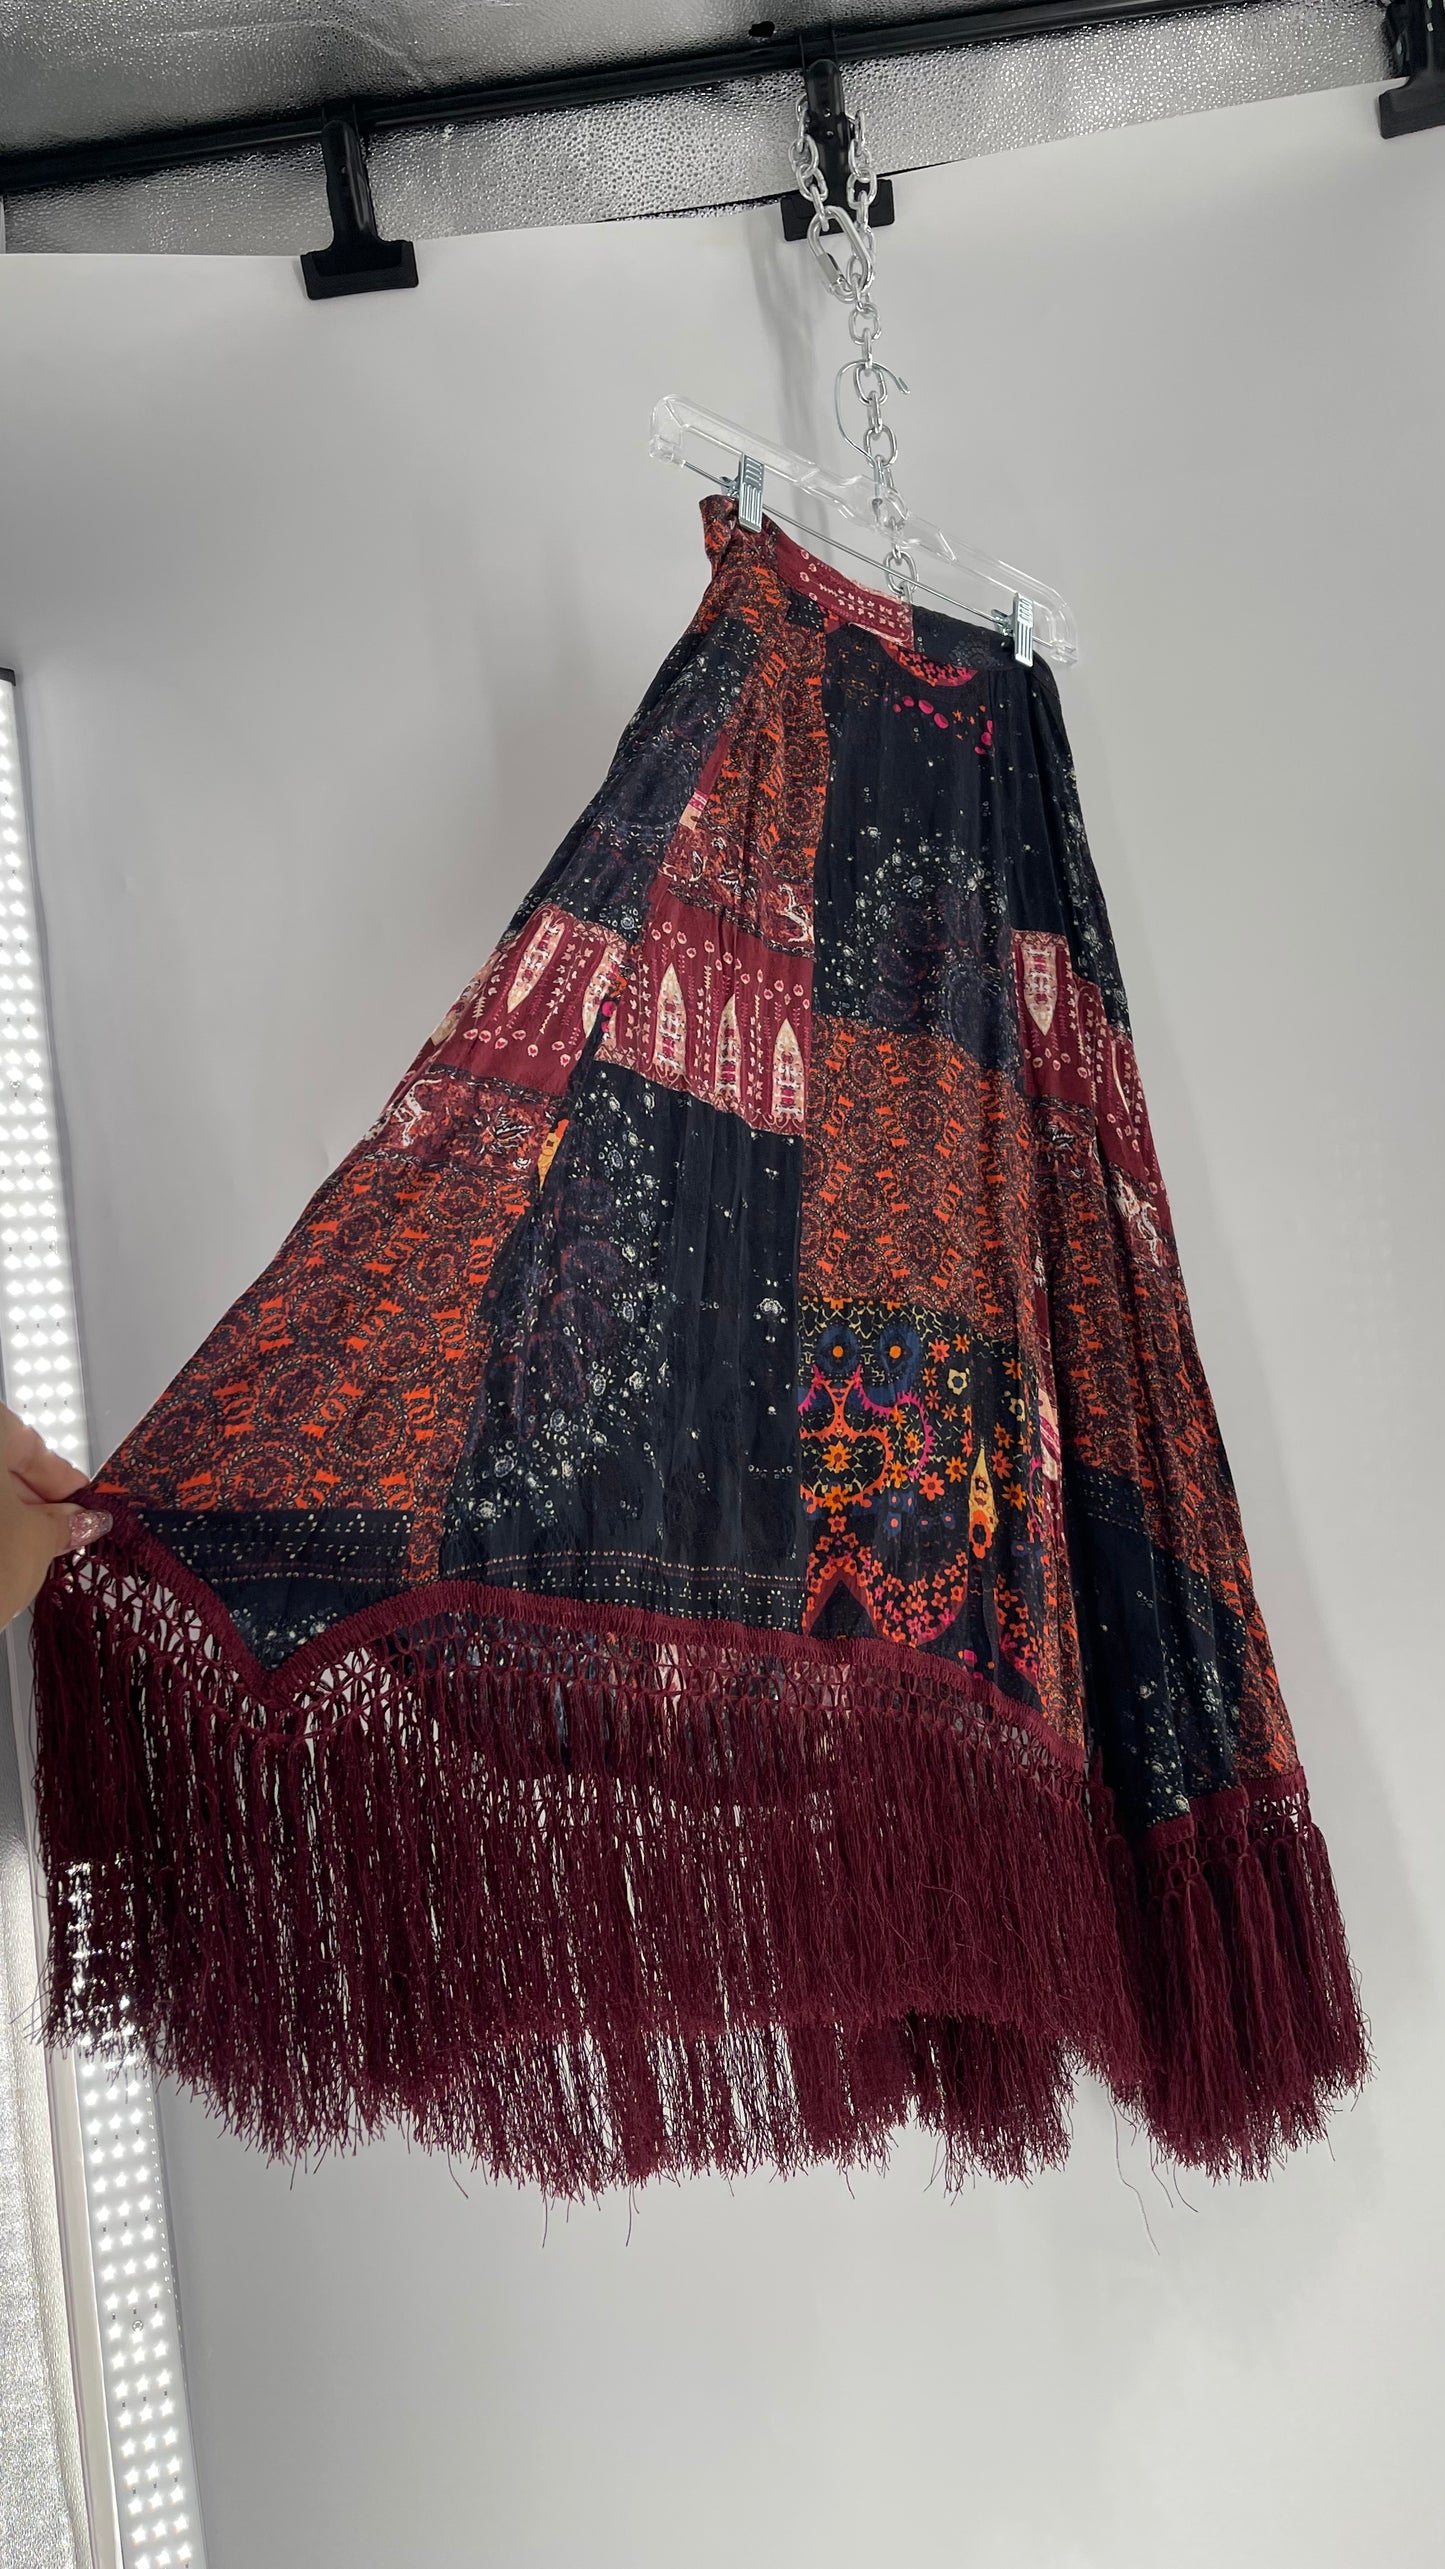 Free People Burgundy Satin Patchwork Patterned Fringe Full Length Skirt with Embossed Symbols and Side Slit Tags Attached (0)